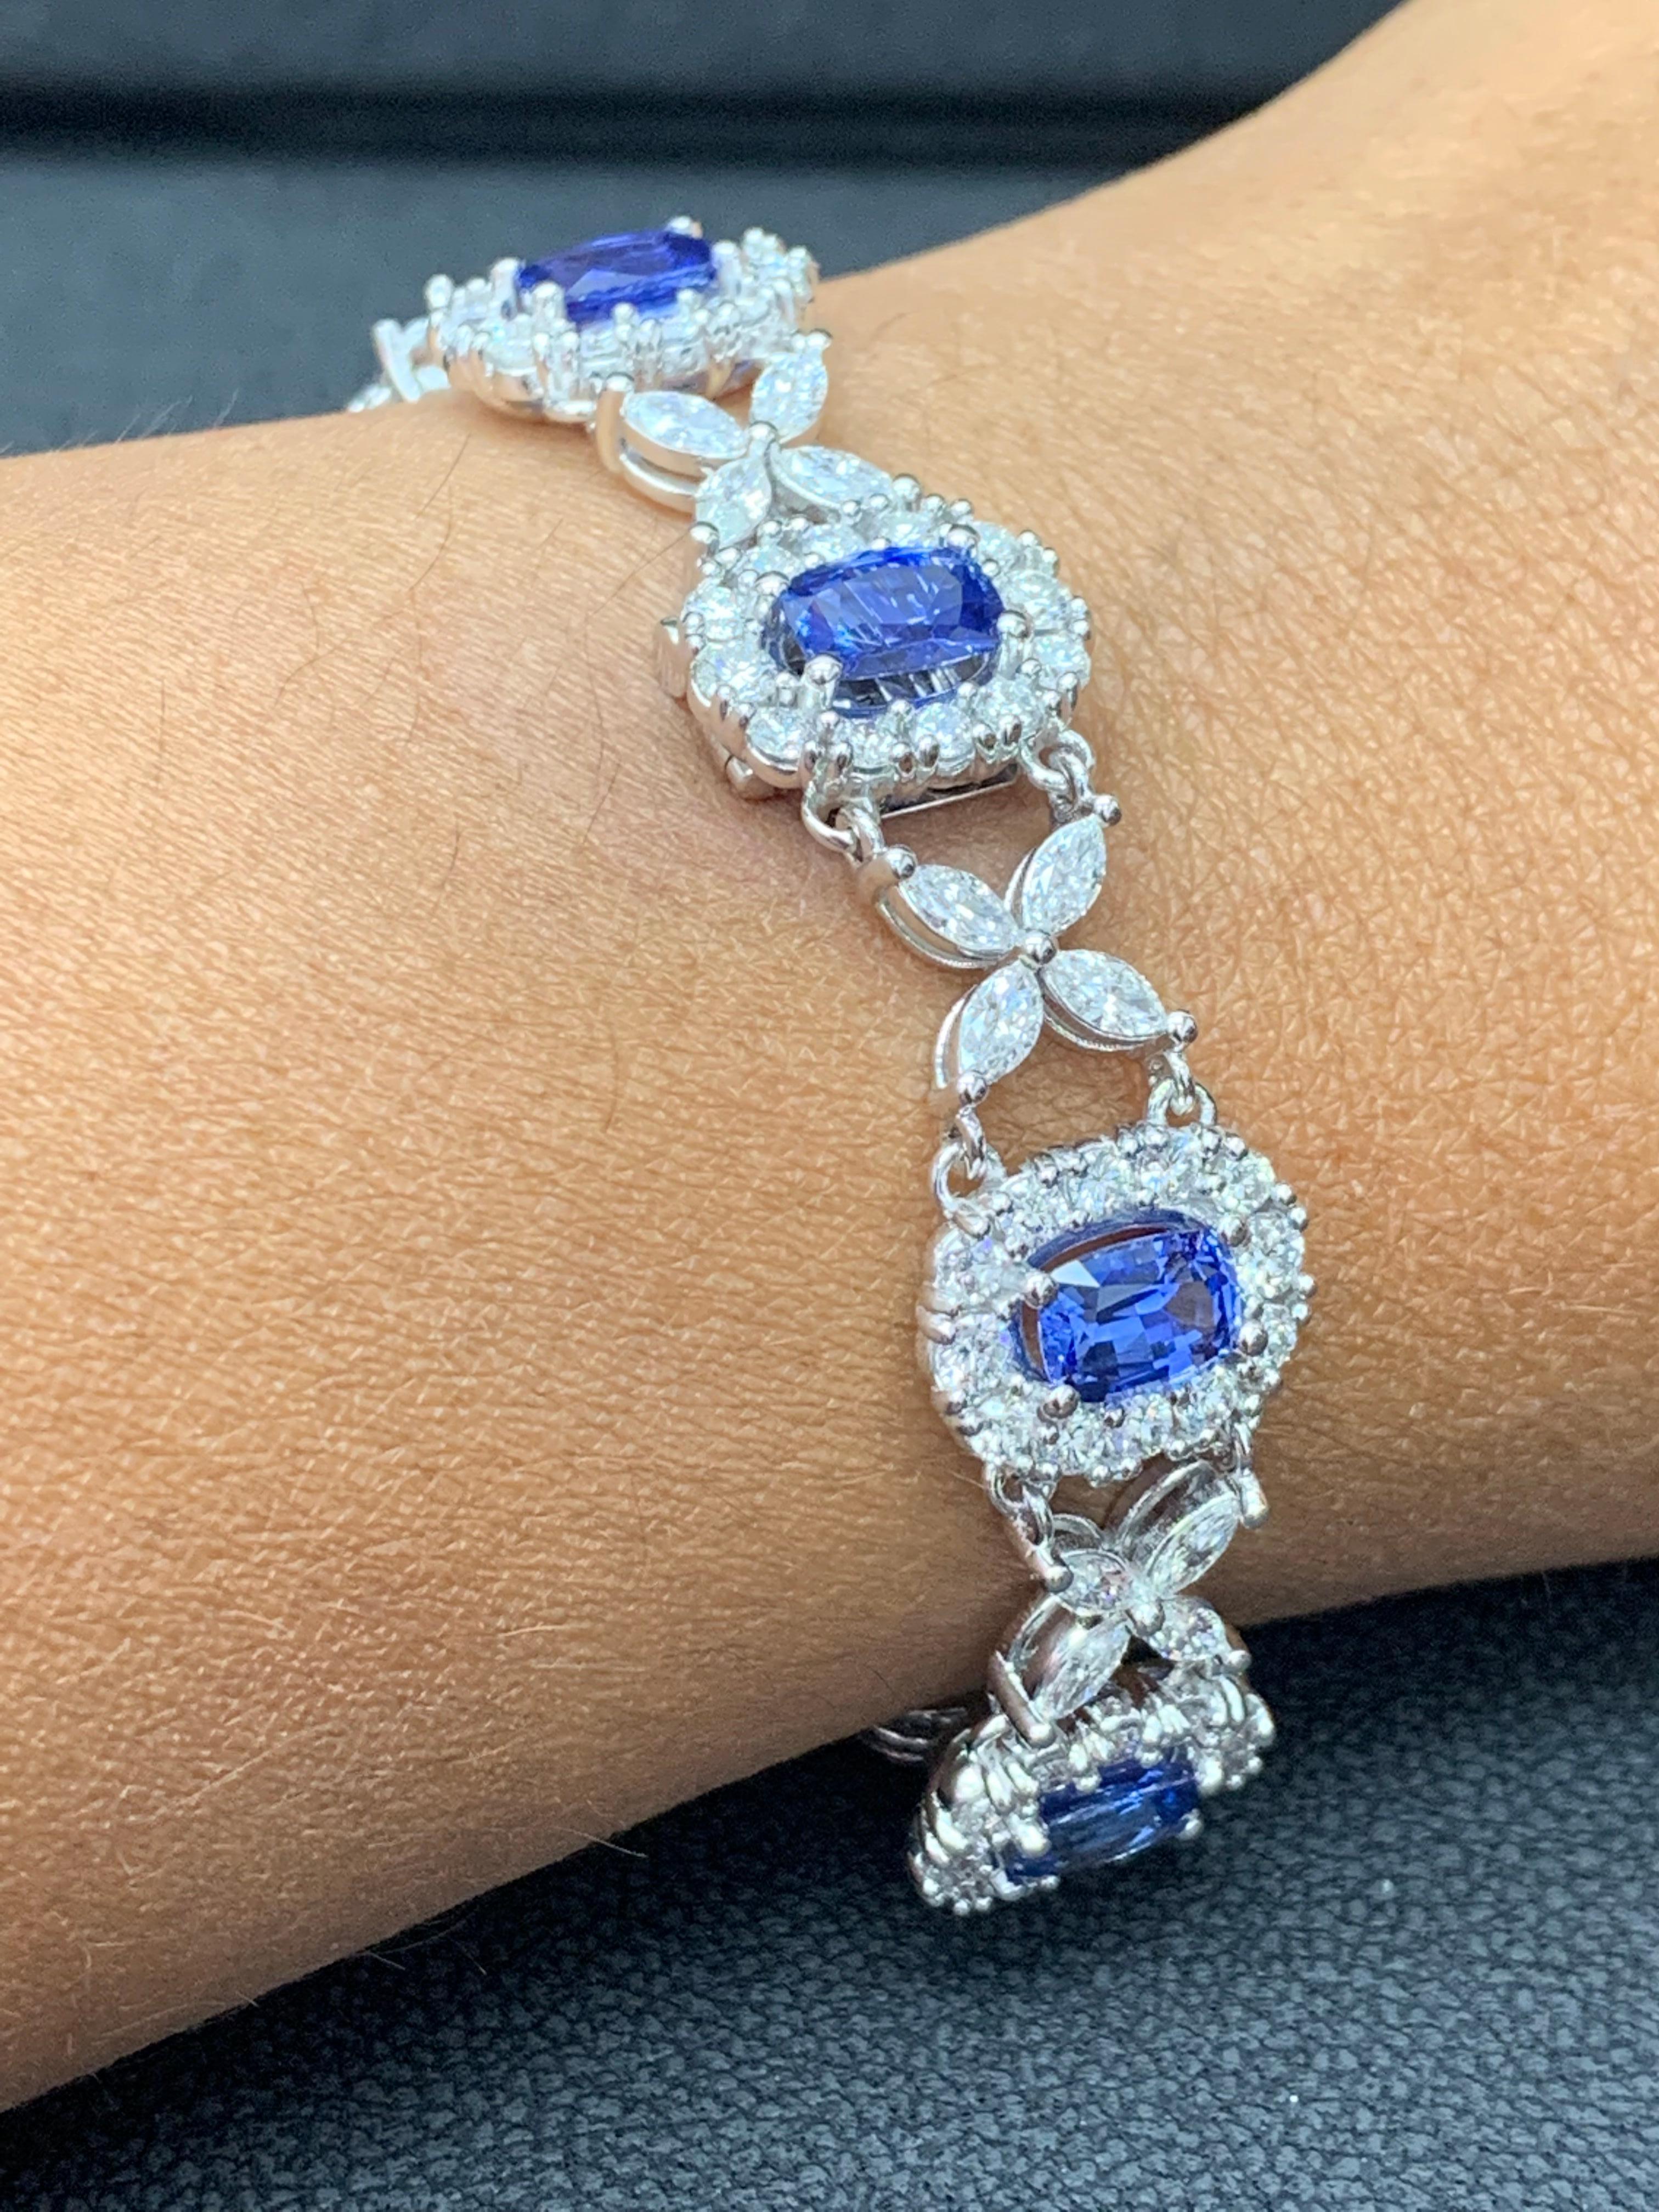 11.47 Carat Oval Cut Blue Sapphire and Diamond Tennis Bracelet in 14K White Gold For Sale 6